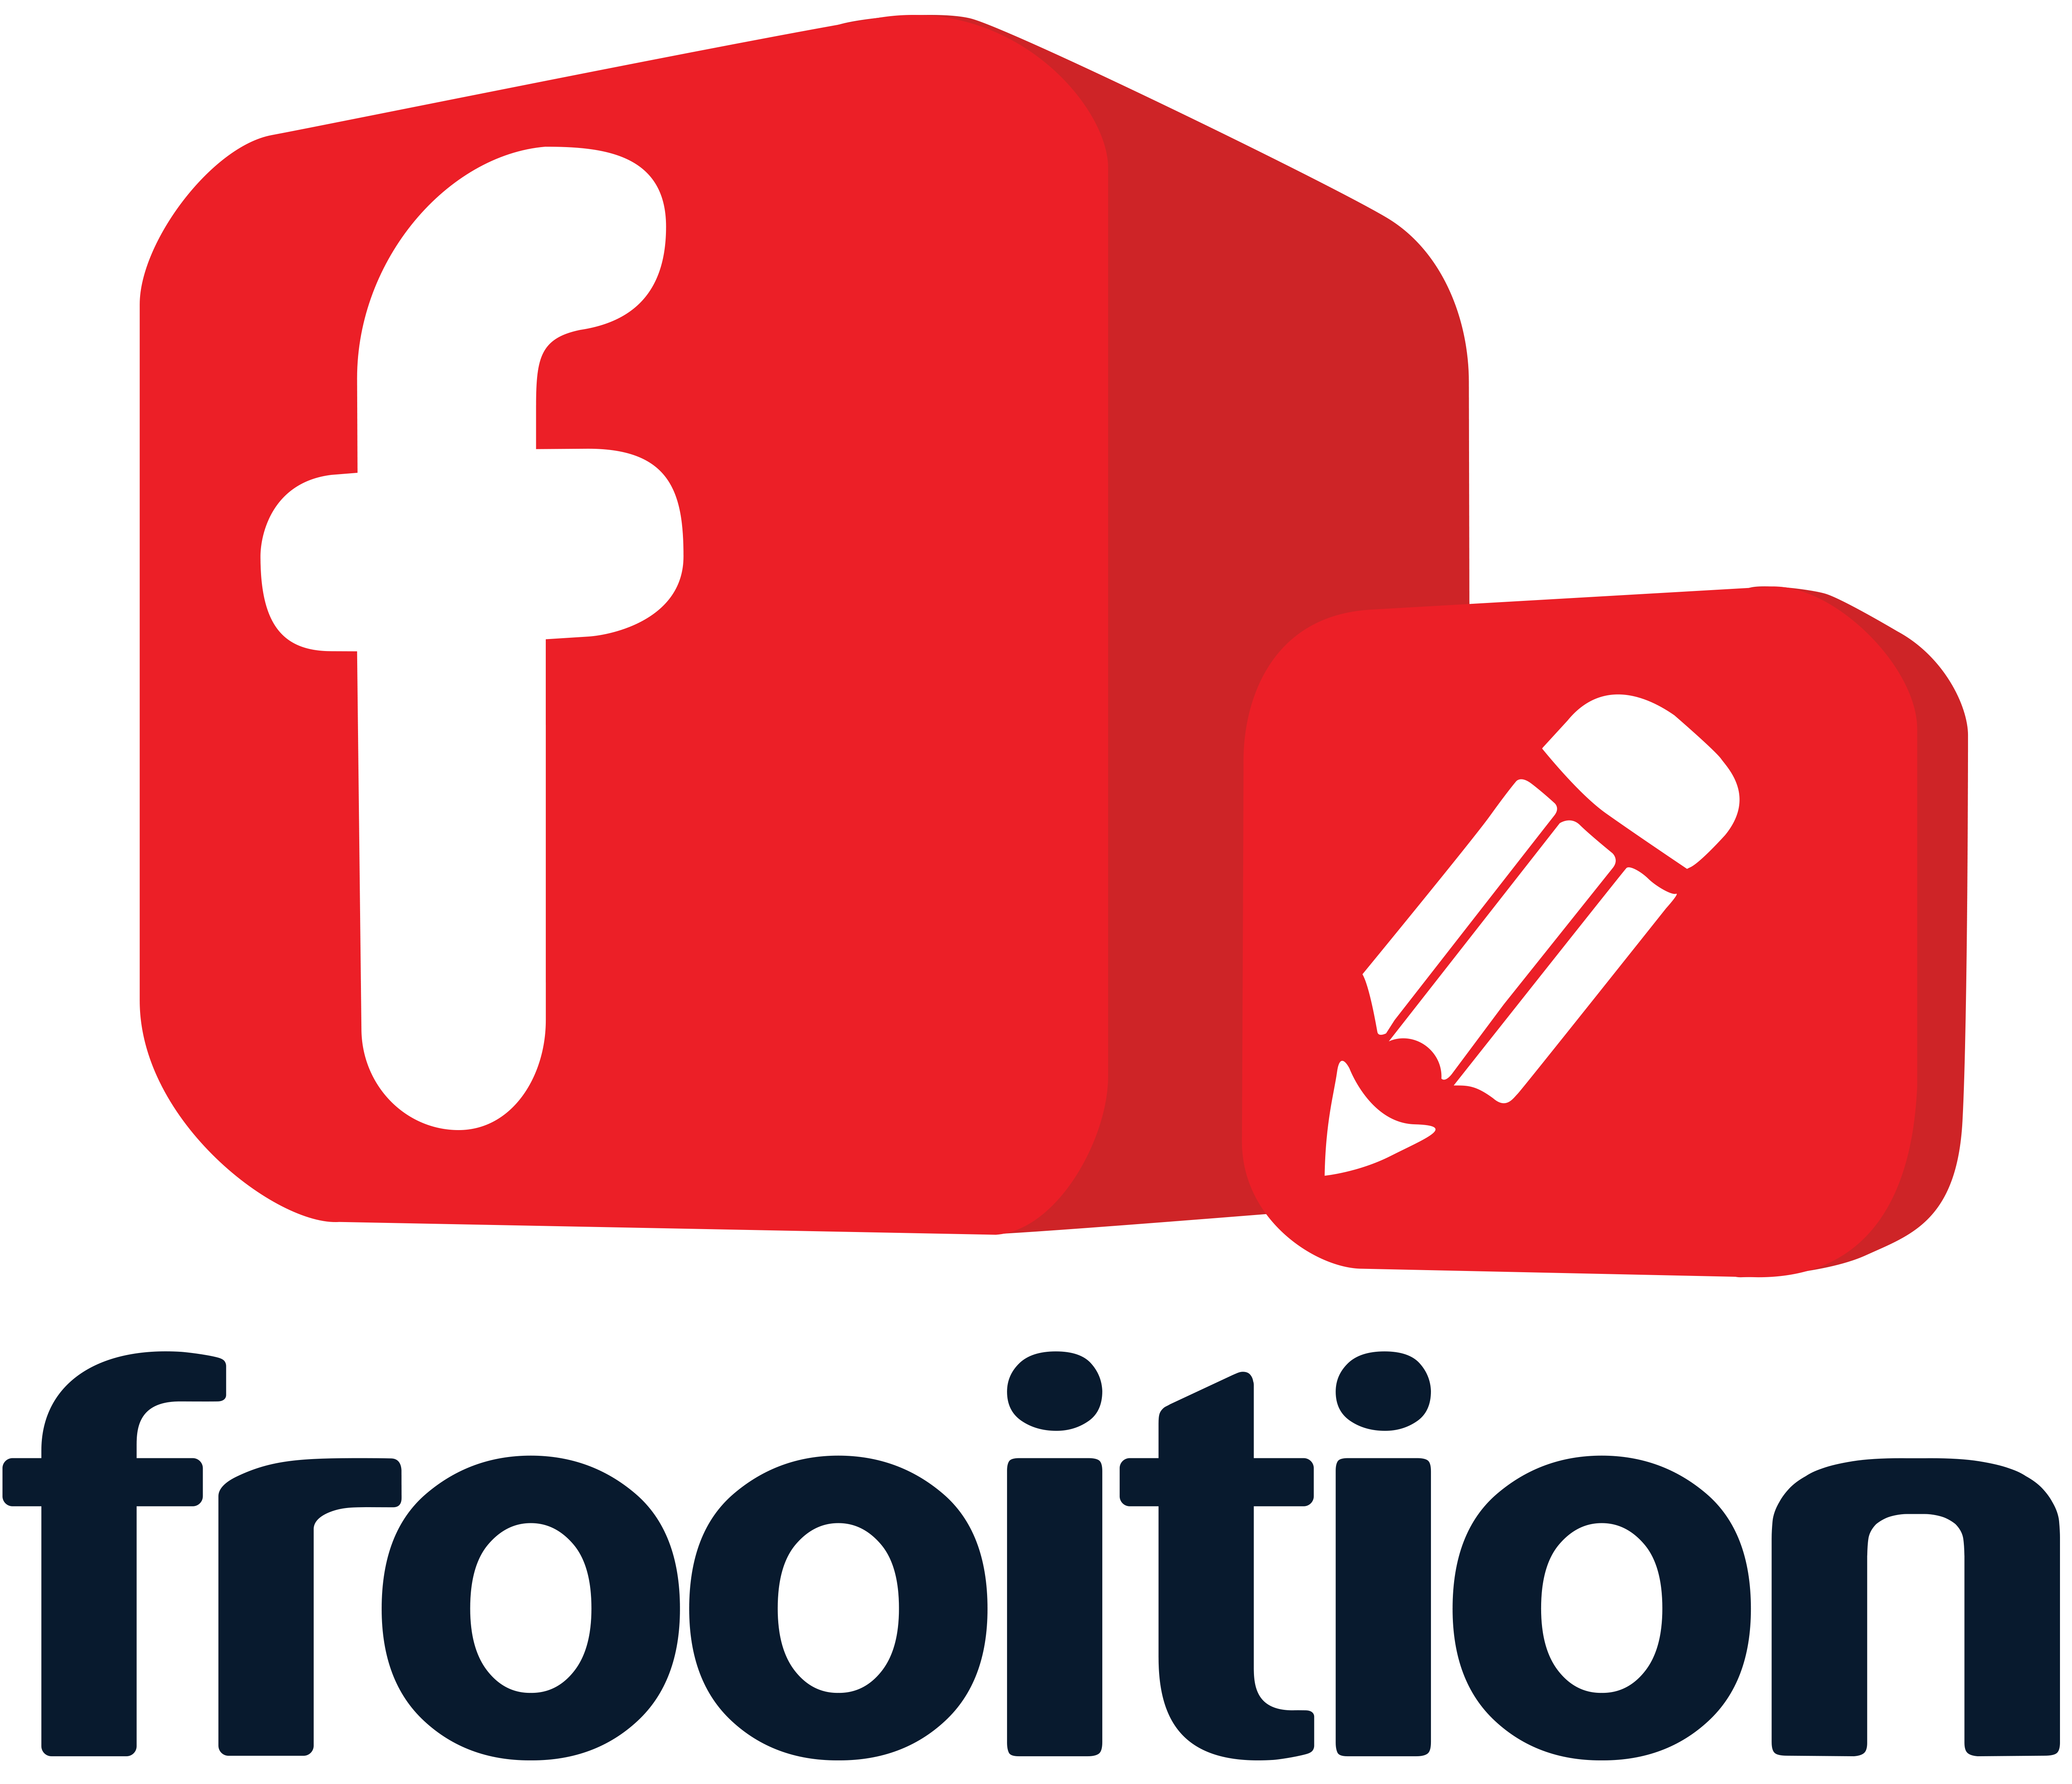 Frooition